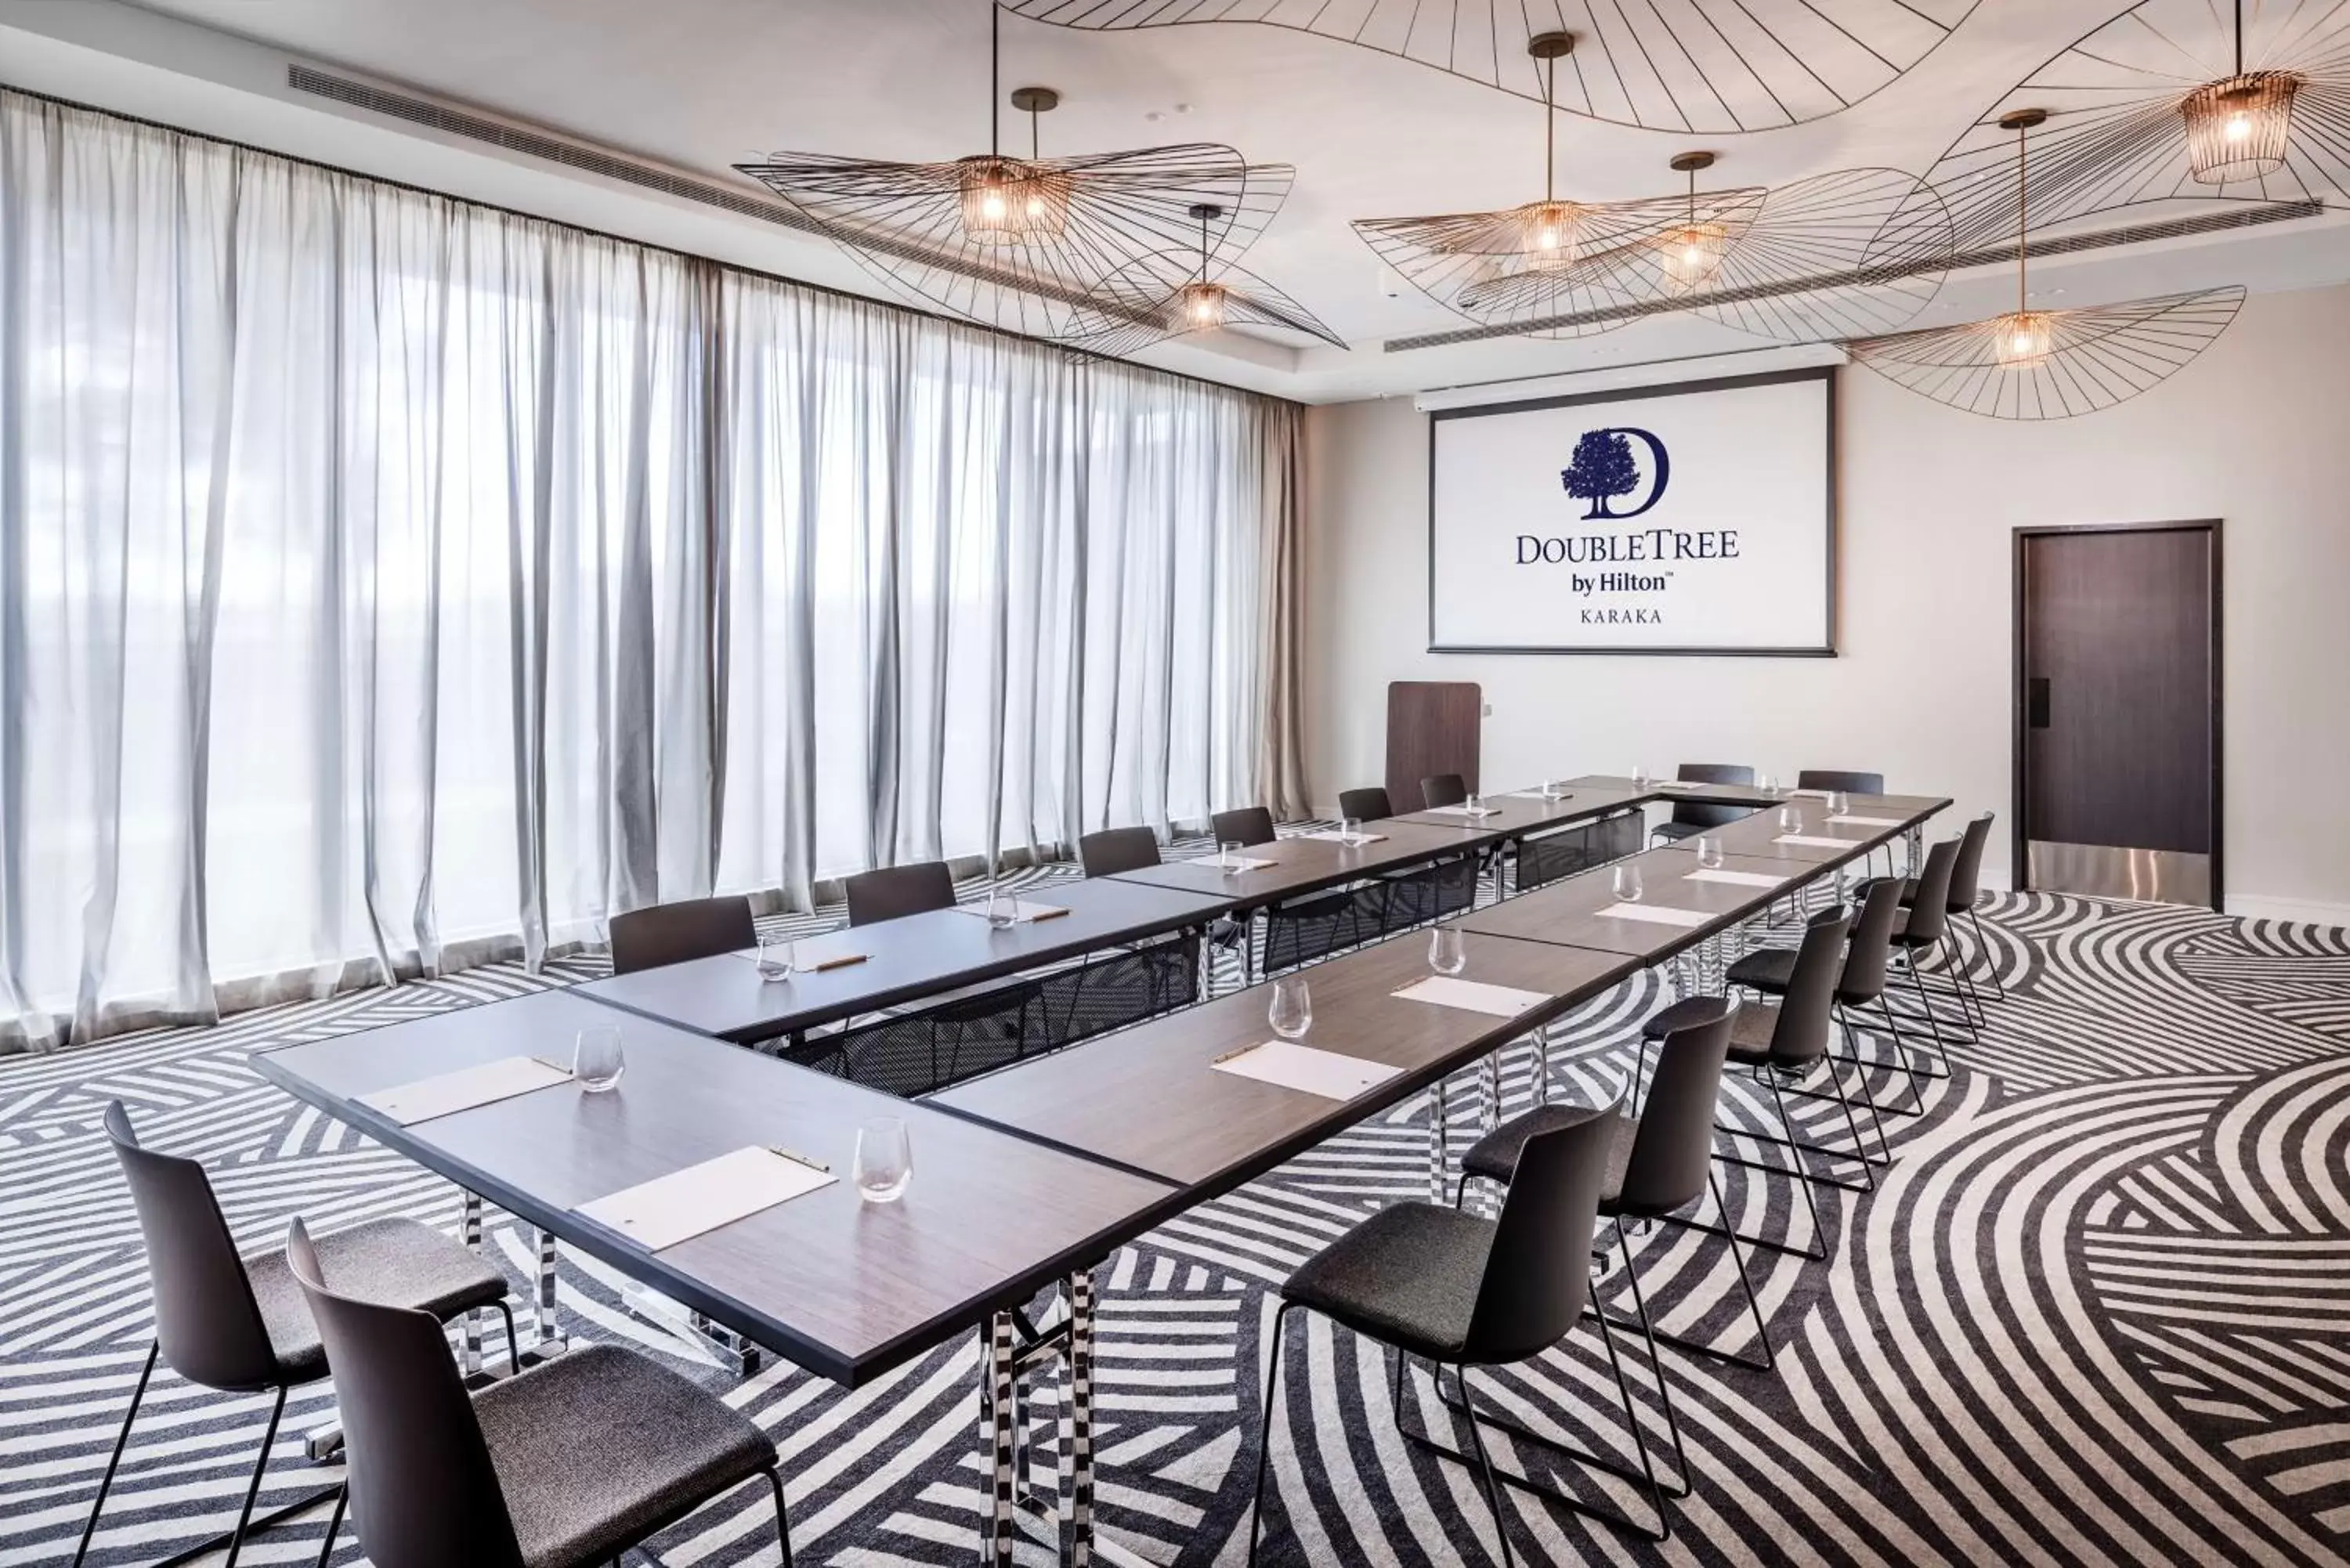 Meeting/conference room in Doubletree By Hilton Karaka